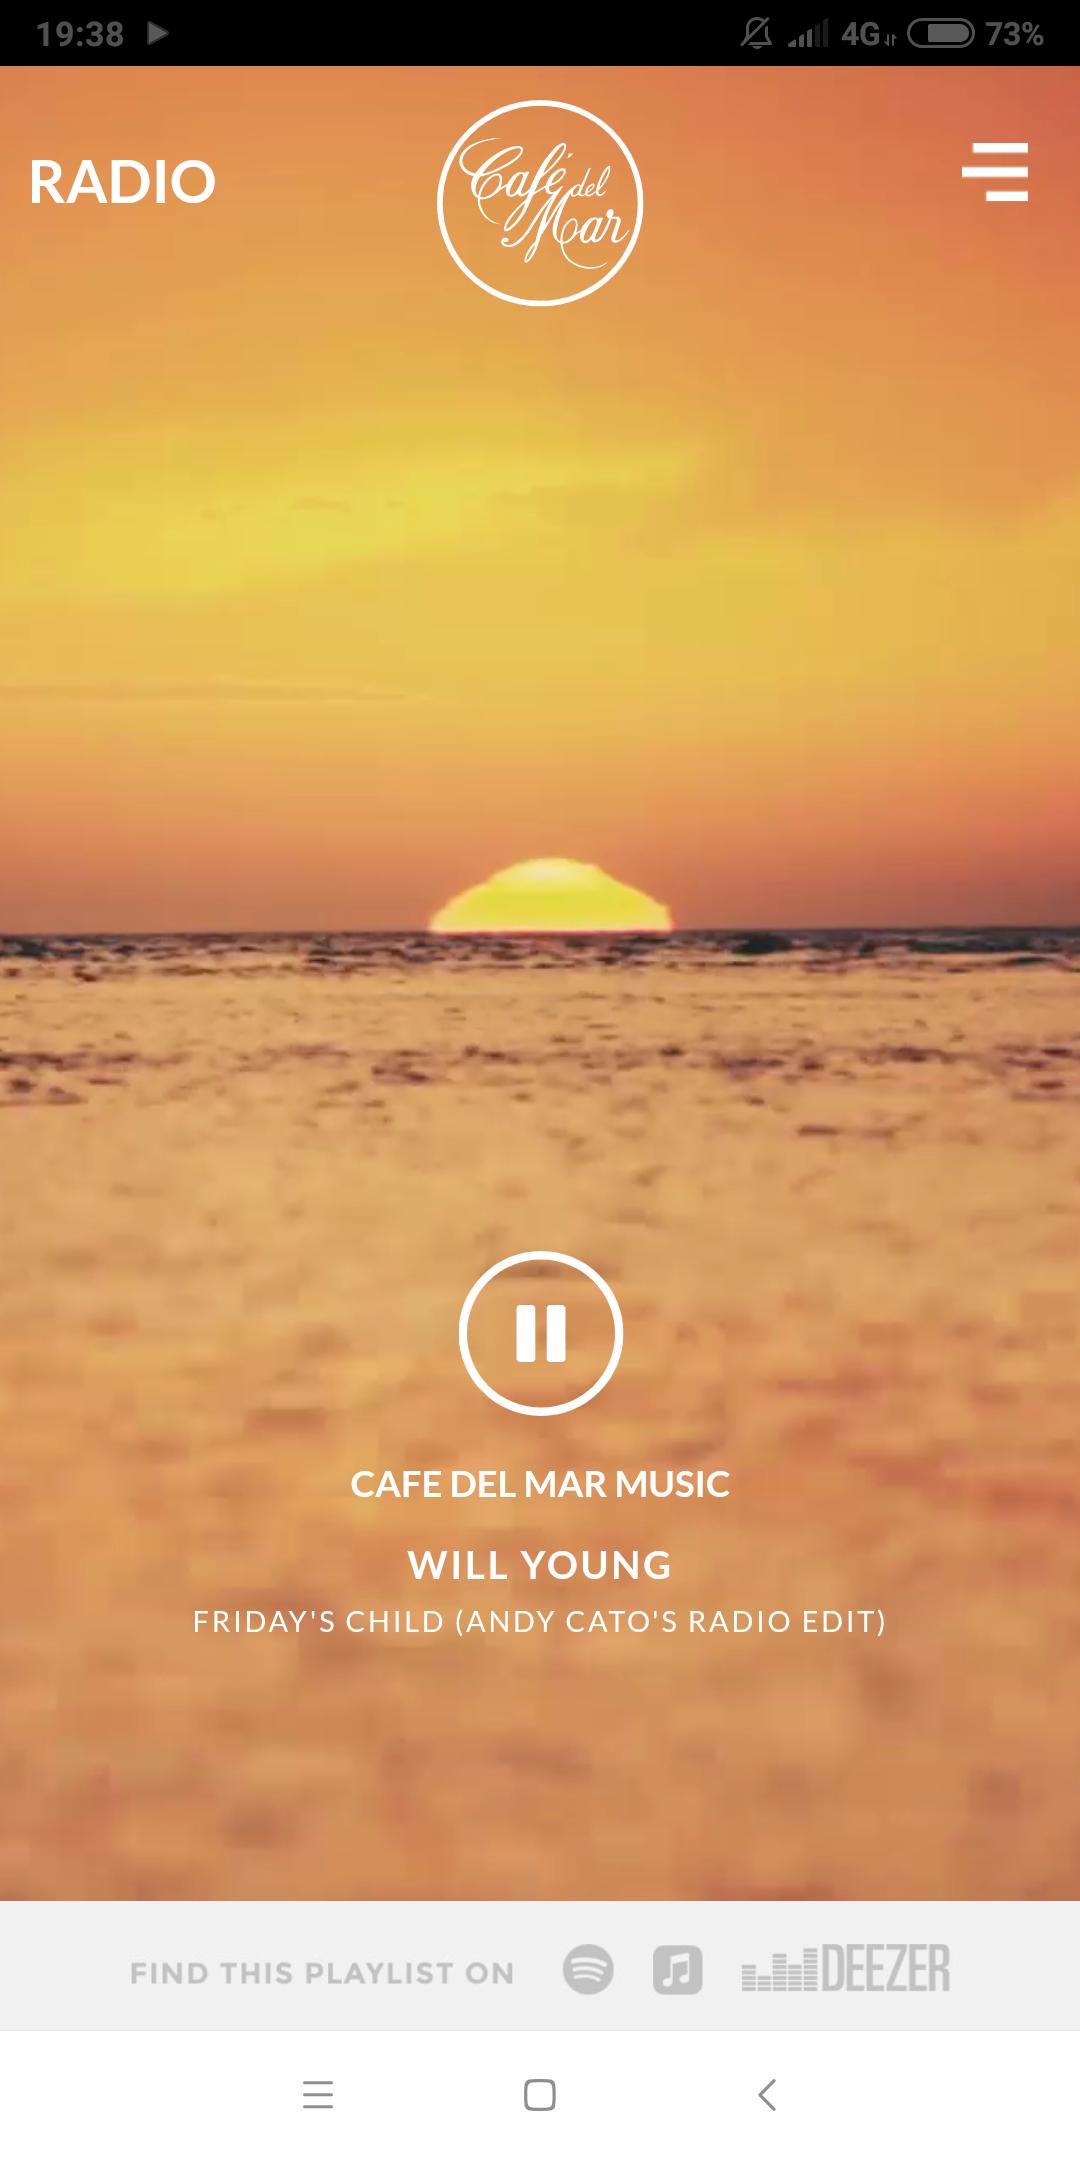 Cafe Del Mar Radio for Android - APK Download